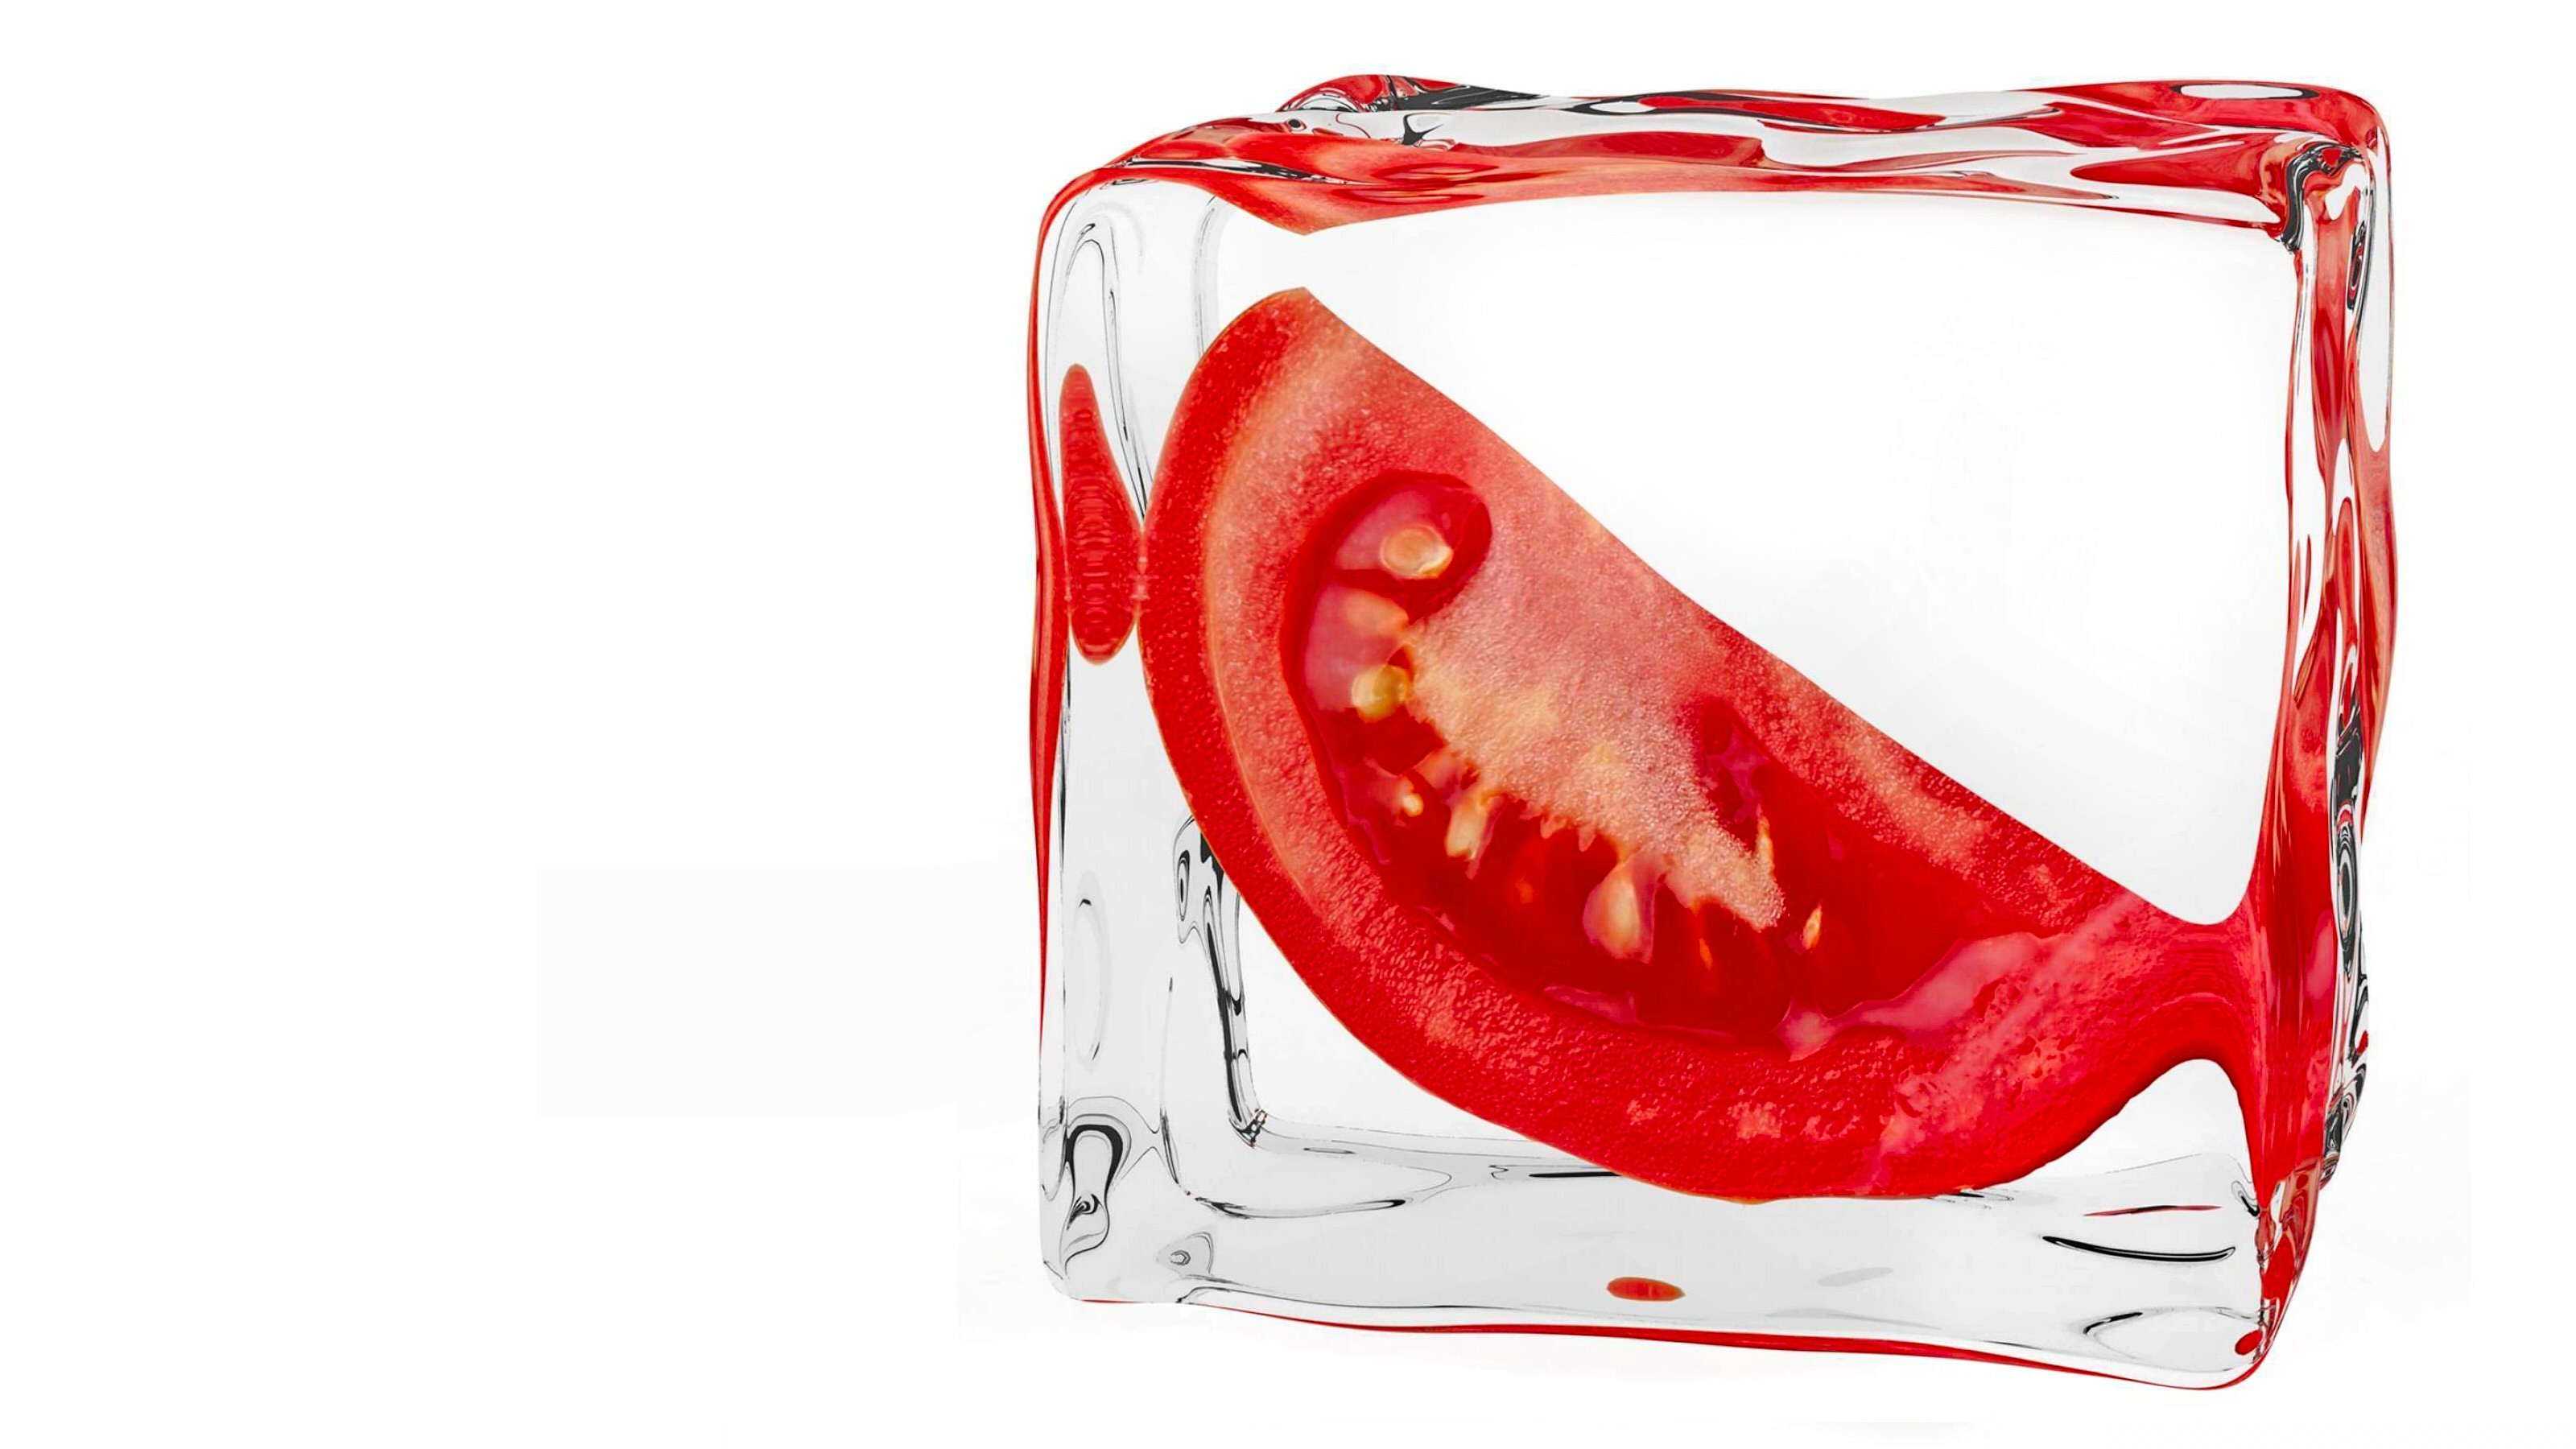 food, tomato, ice cube, red, fruits